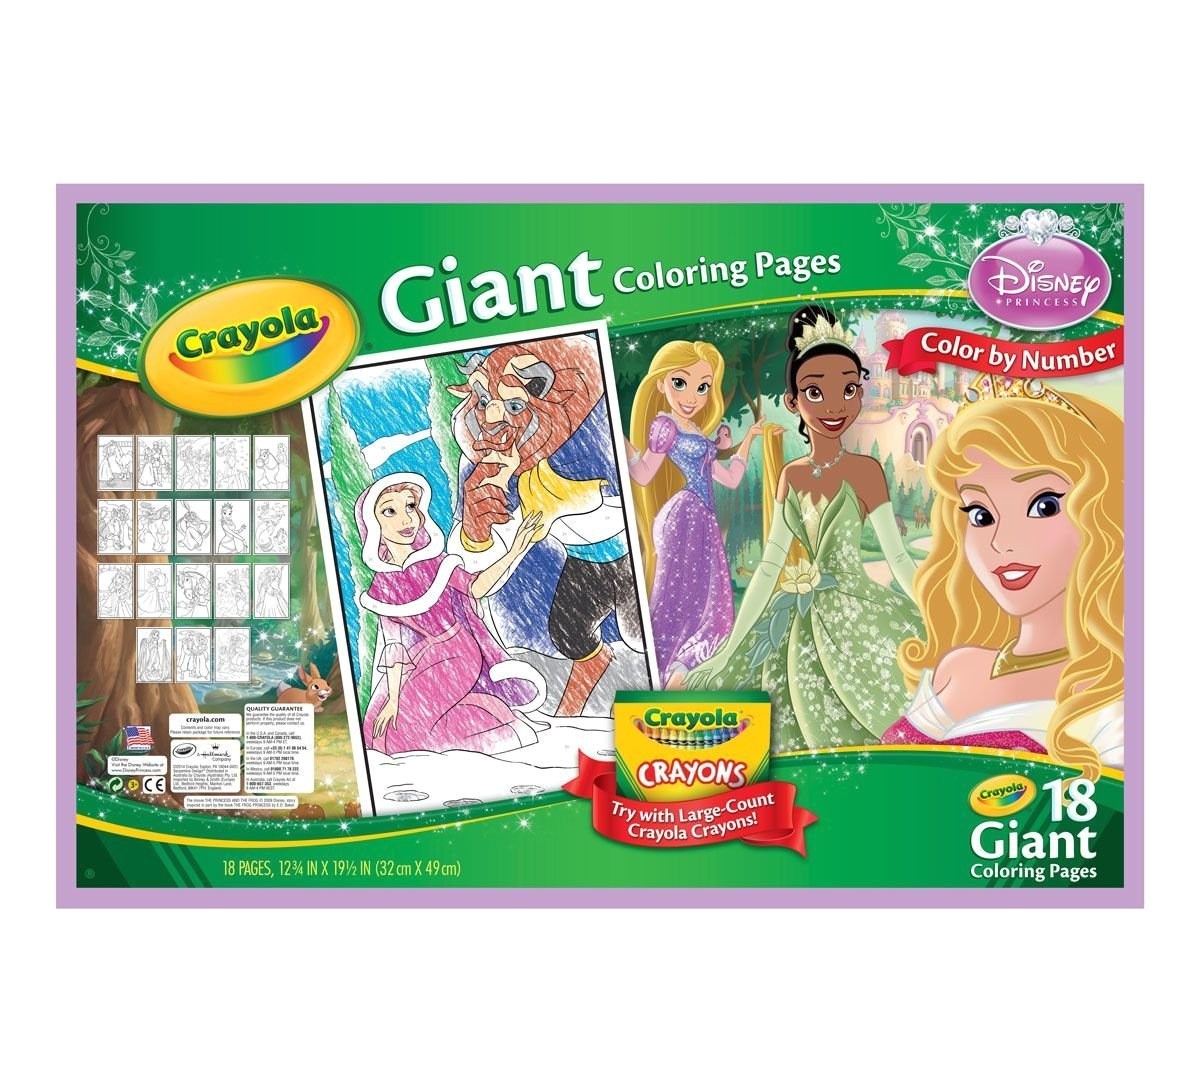 Crayola Giant Coloring Pages Unique Amazon Crayola Disney Princess Giant Coloring Pages toys Games Stock